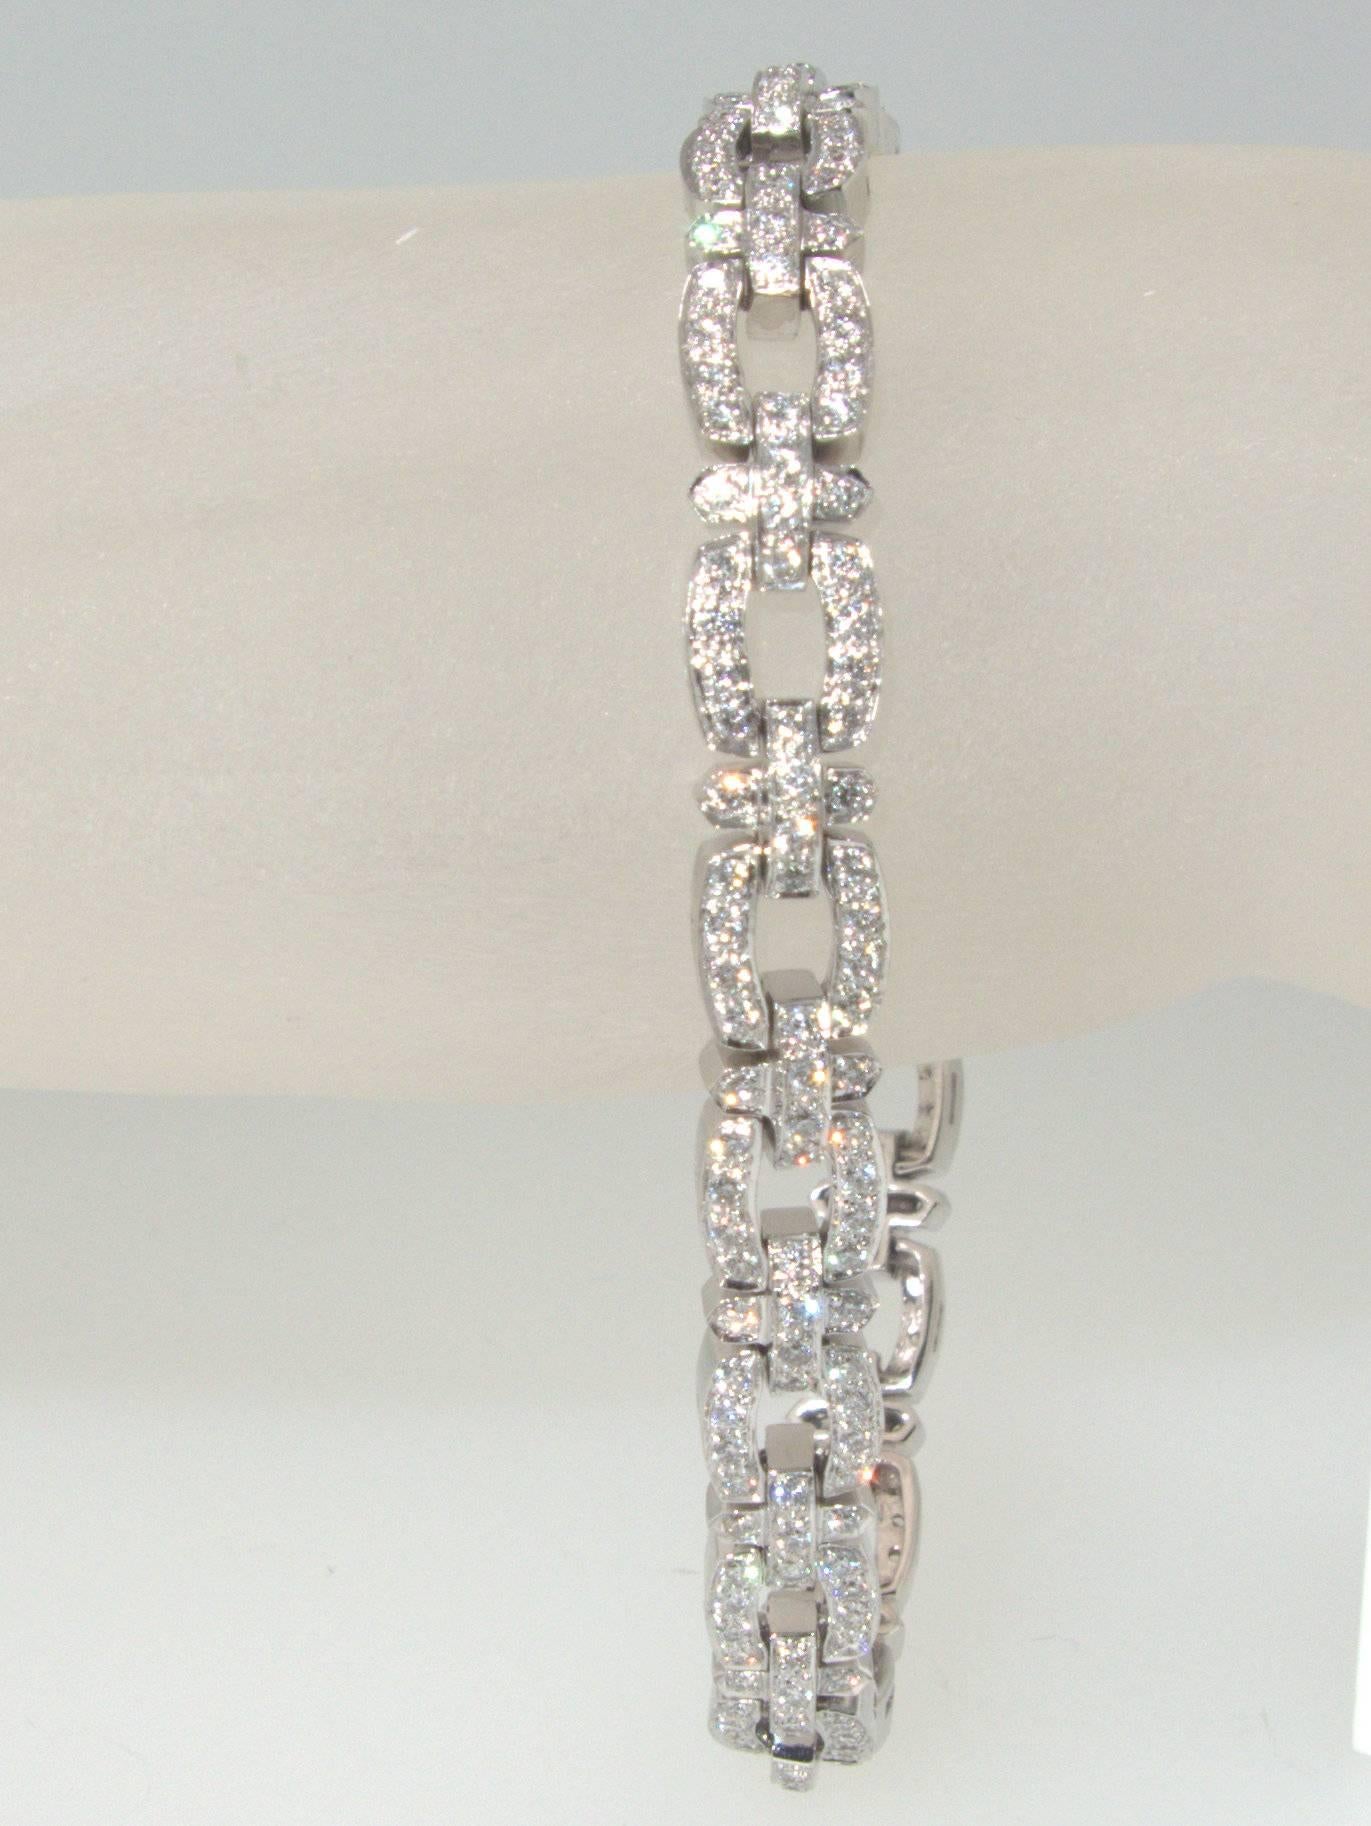 18K white gold links hold 252 fine, well matched, modern brilliant cut diamonds all near colorless (H) and very slightly included (VS). j There are approximately 5 cts totally.  This highly wearable bracelet is just over 7 inches long.